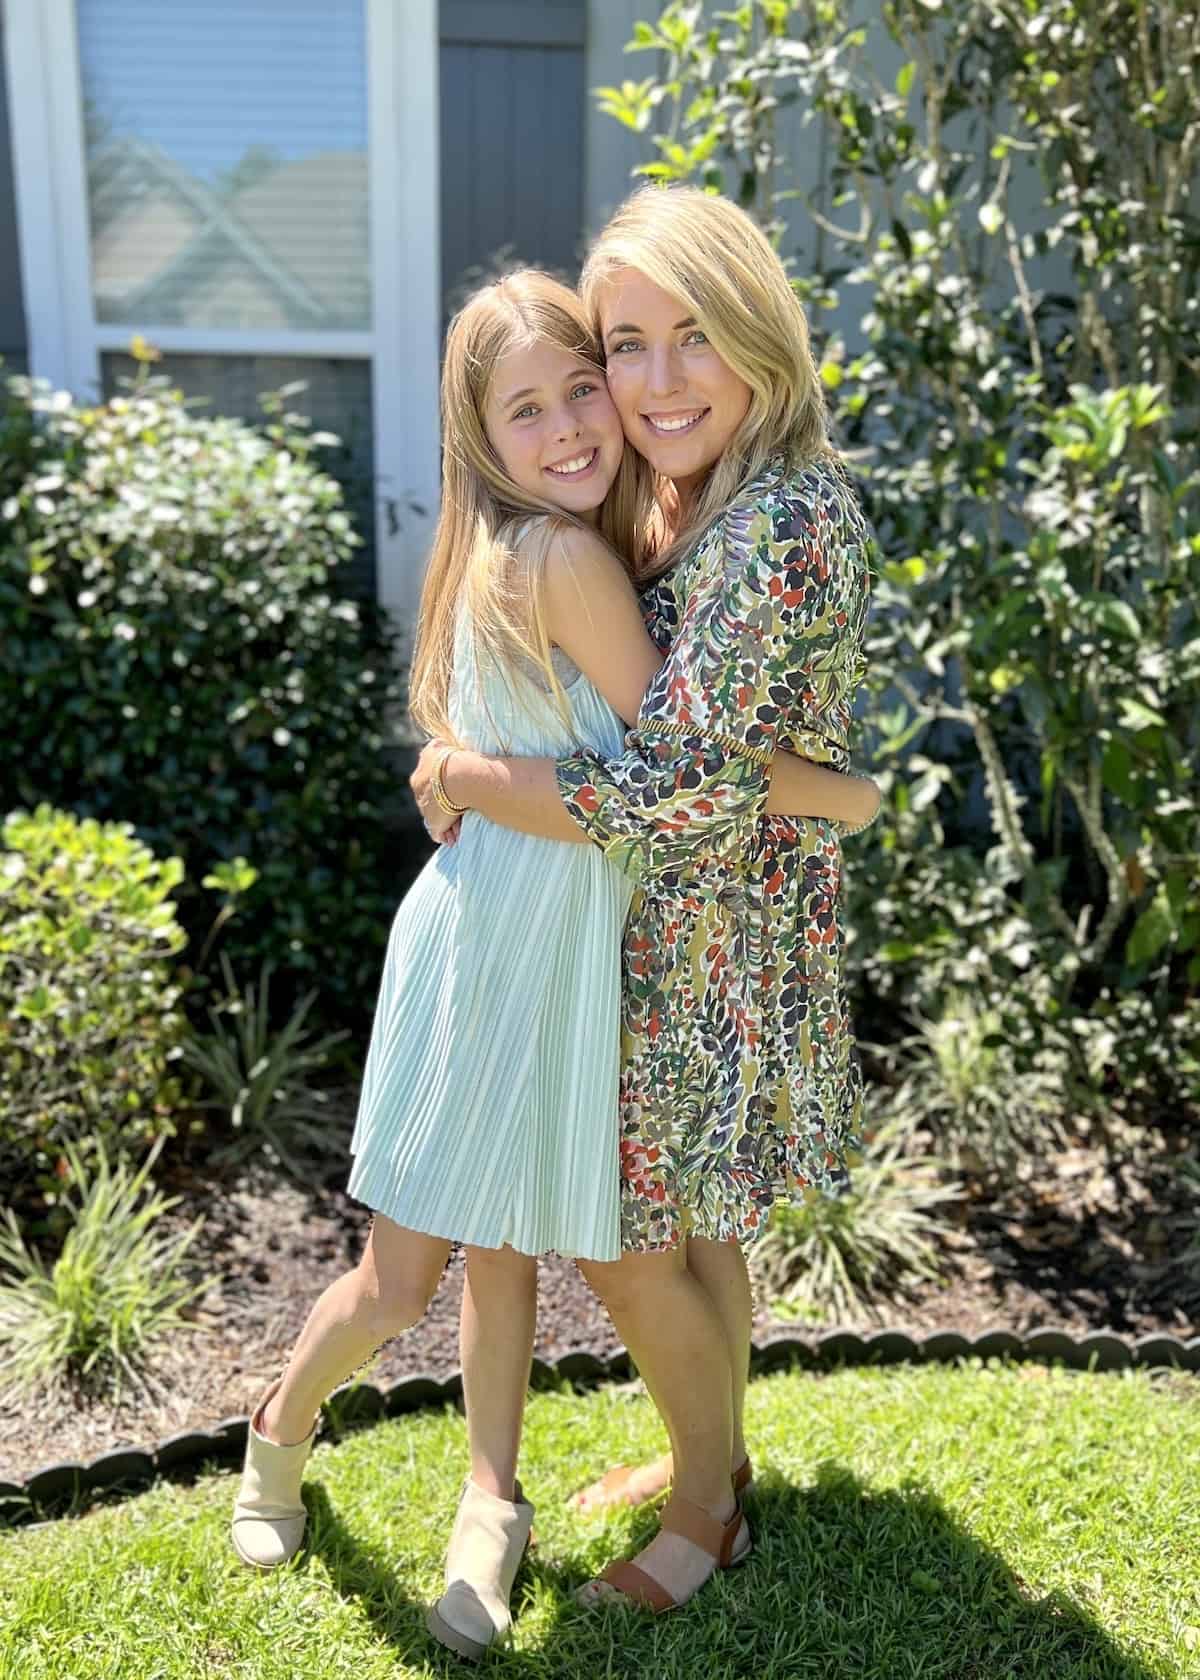 Letter to My Daughter on Her 11th Birthday Love Mom: {Britt’s Bday Letter From Mom}